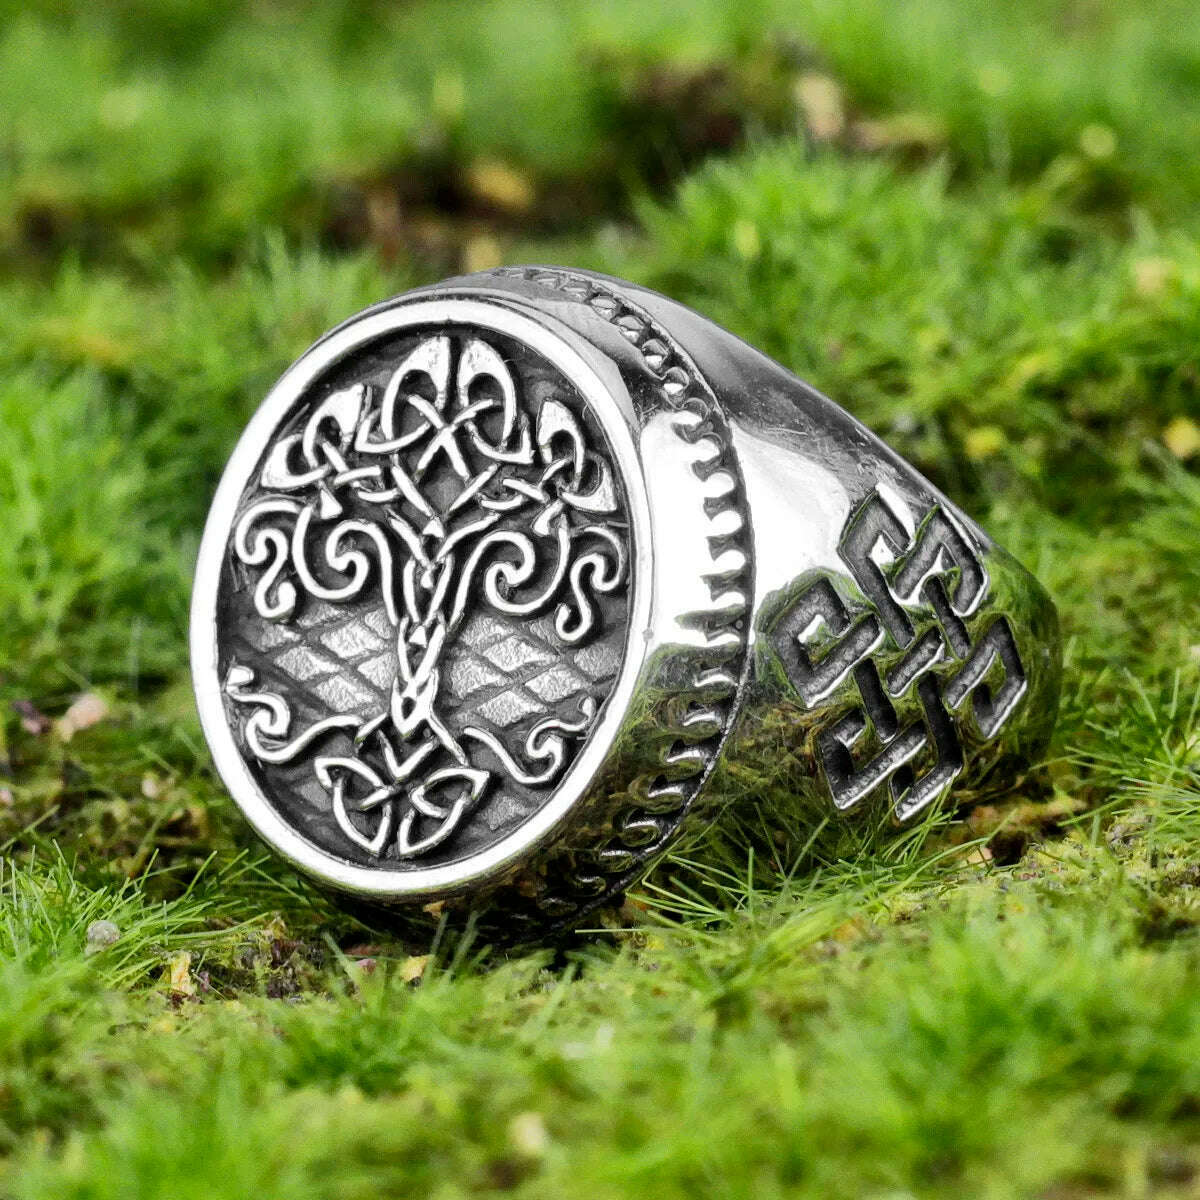 KIMLUD, Viking Tree of Life Celtic Knot Stainless Steel Mens Rings Unique For Male Boyfriend Biker Jewelry Creativity Gift Wholesale, KIMLUD Womens Clothes